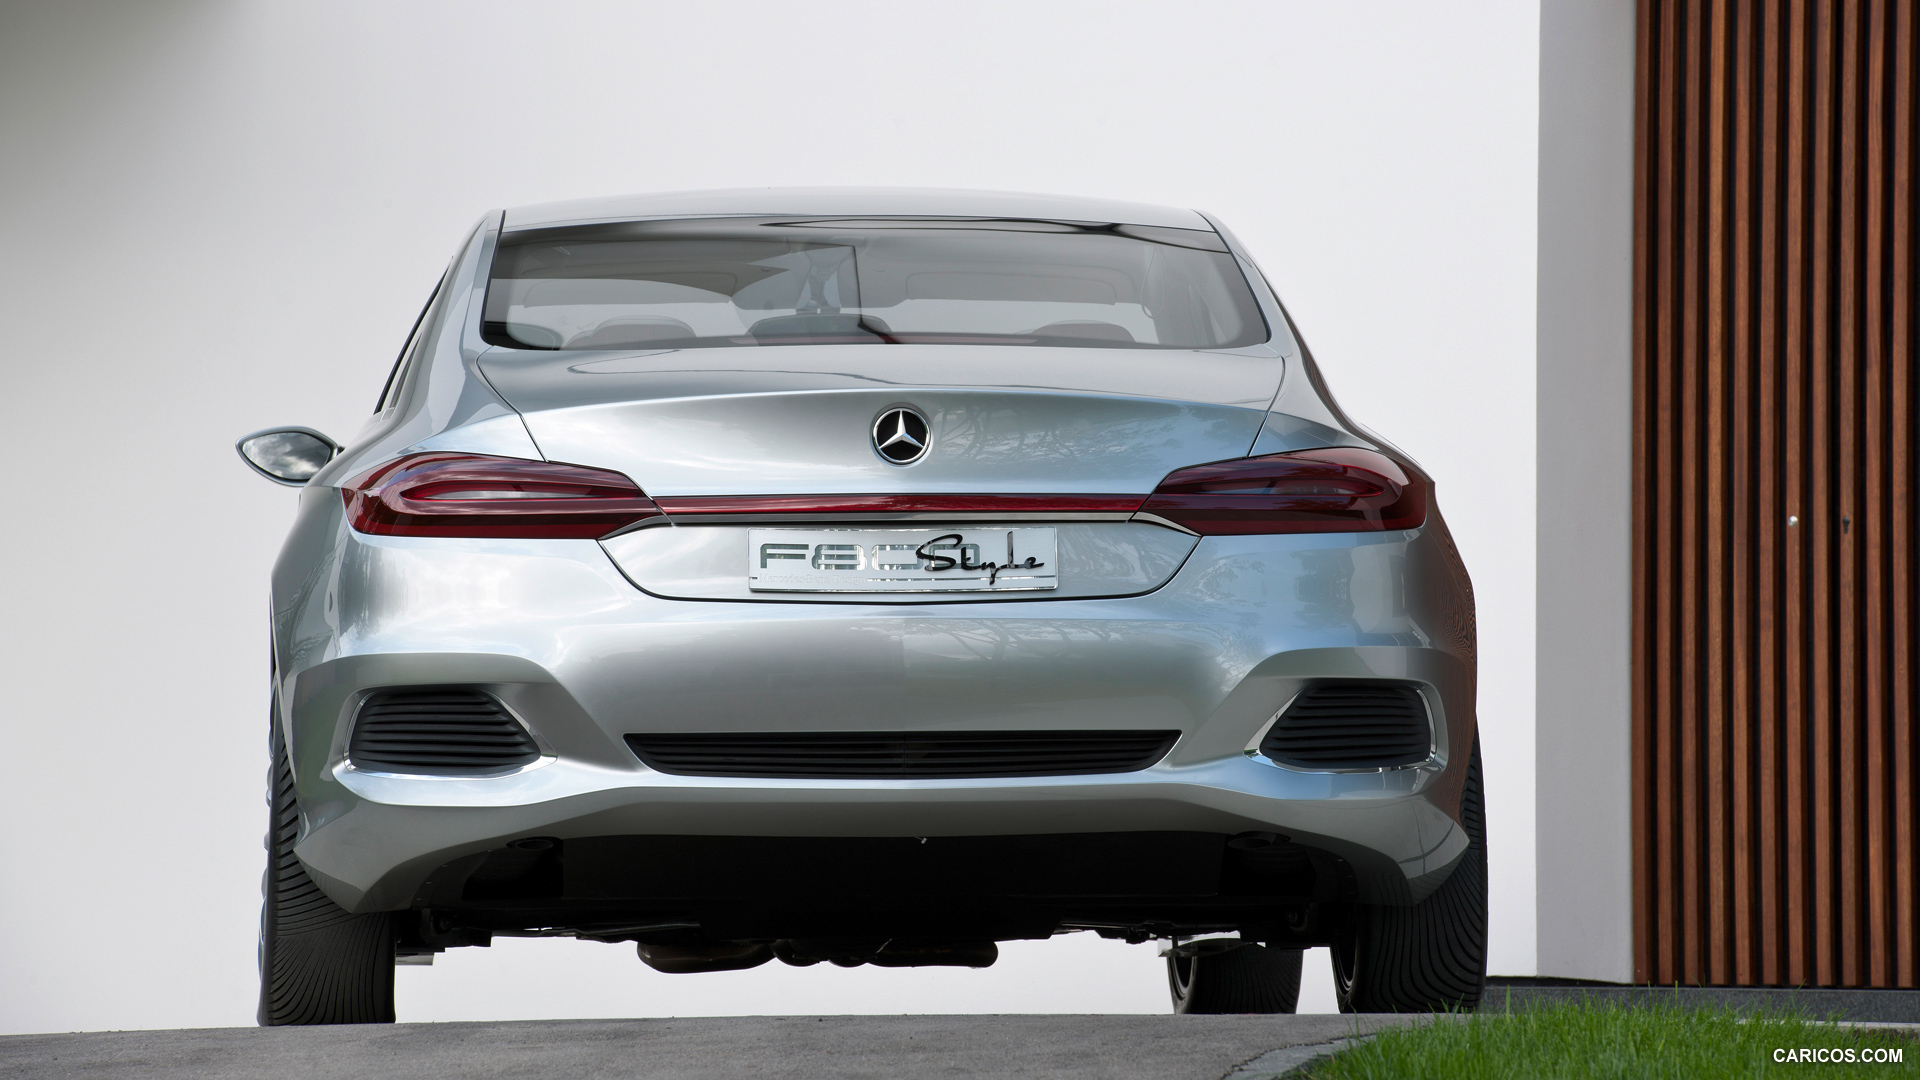 Mercedes-Benz F800 Style Concept (2010)  - Rear Angle , #35 of 120